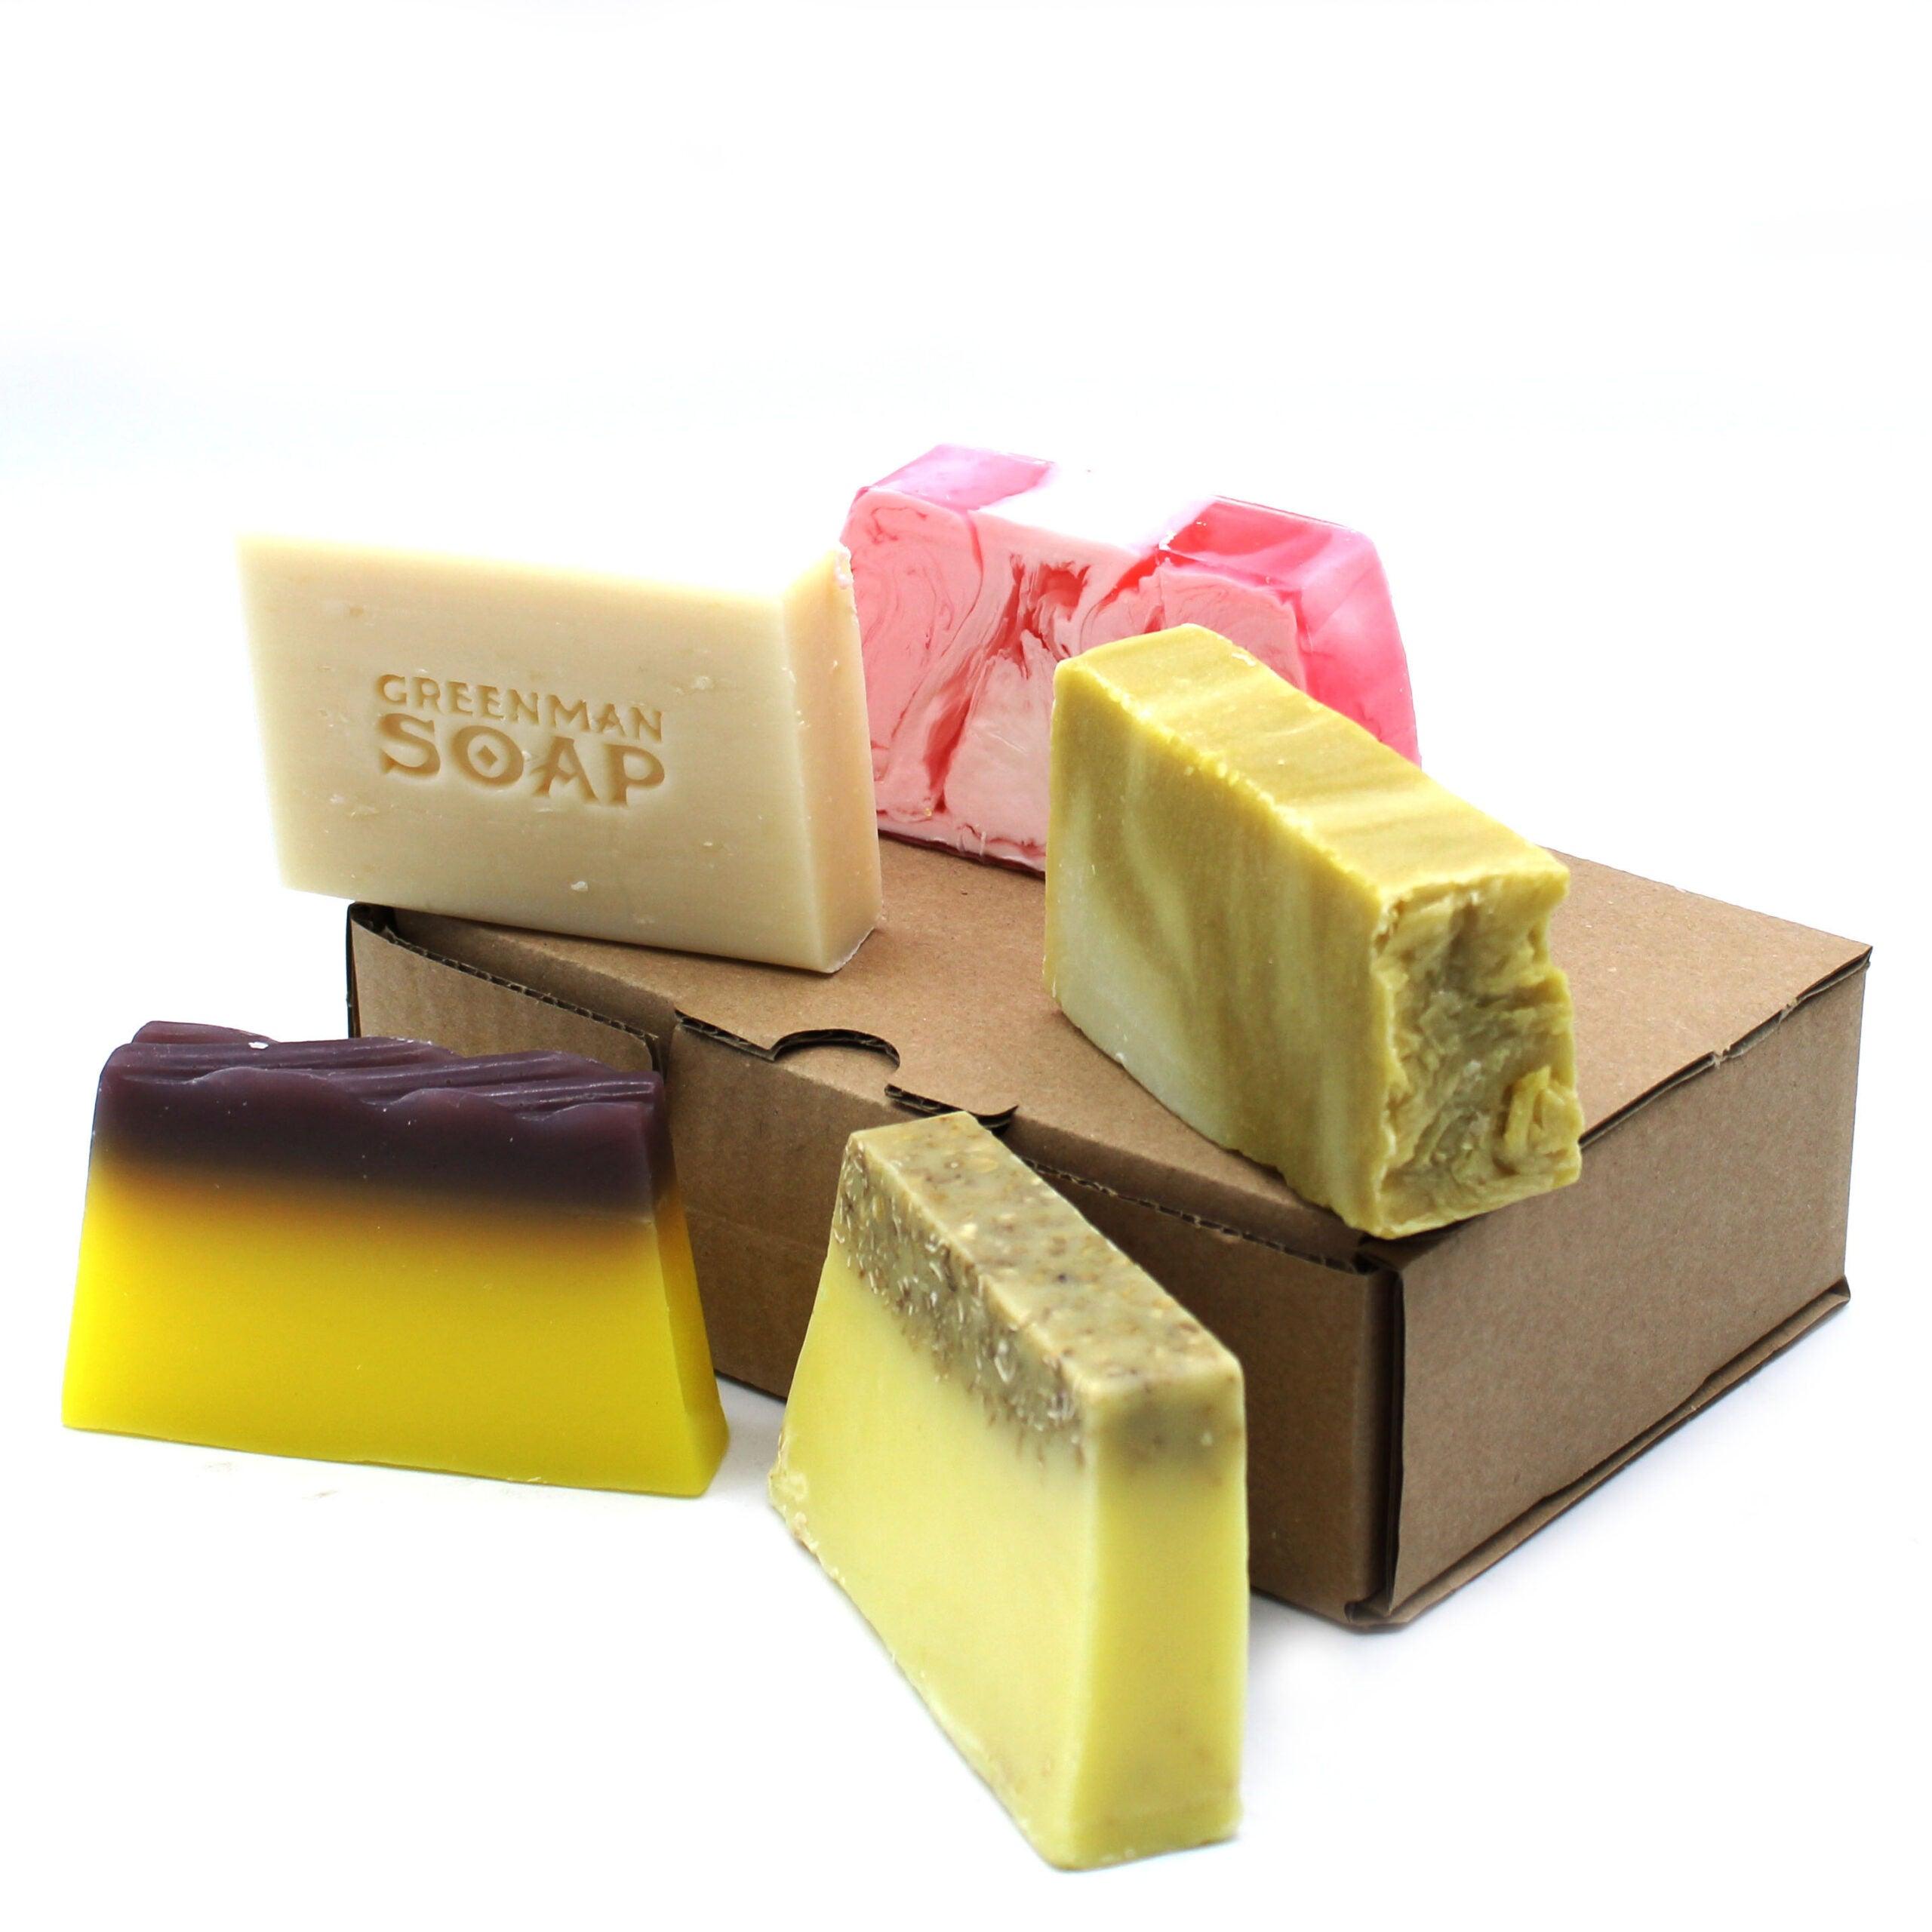 Soap gifts - DuvetDay.co.uk